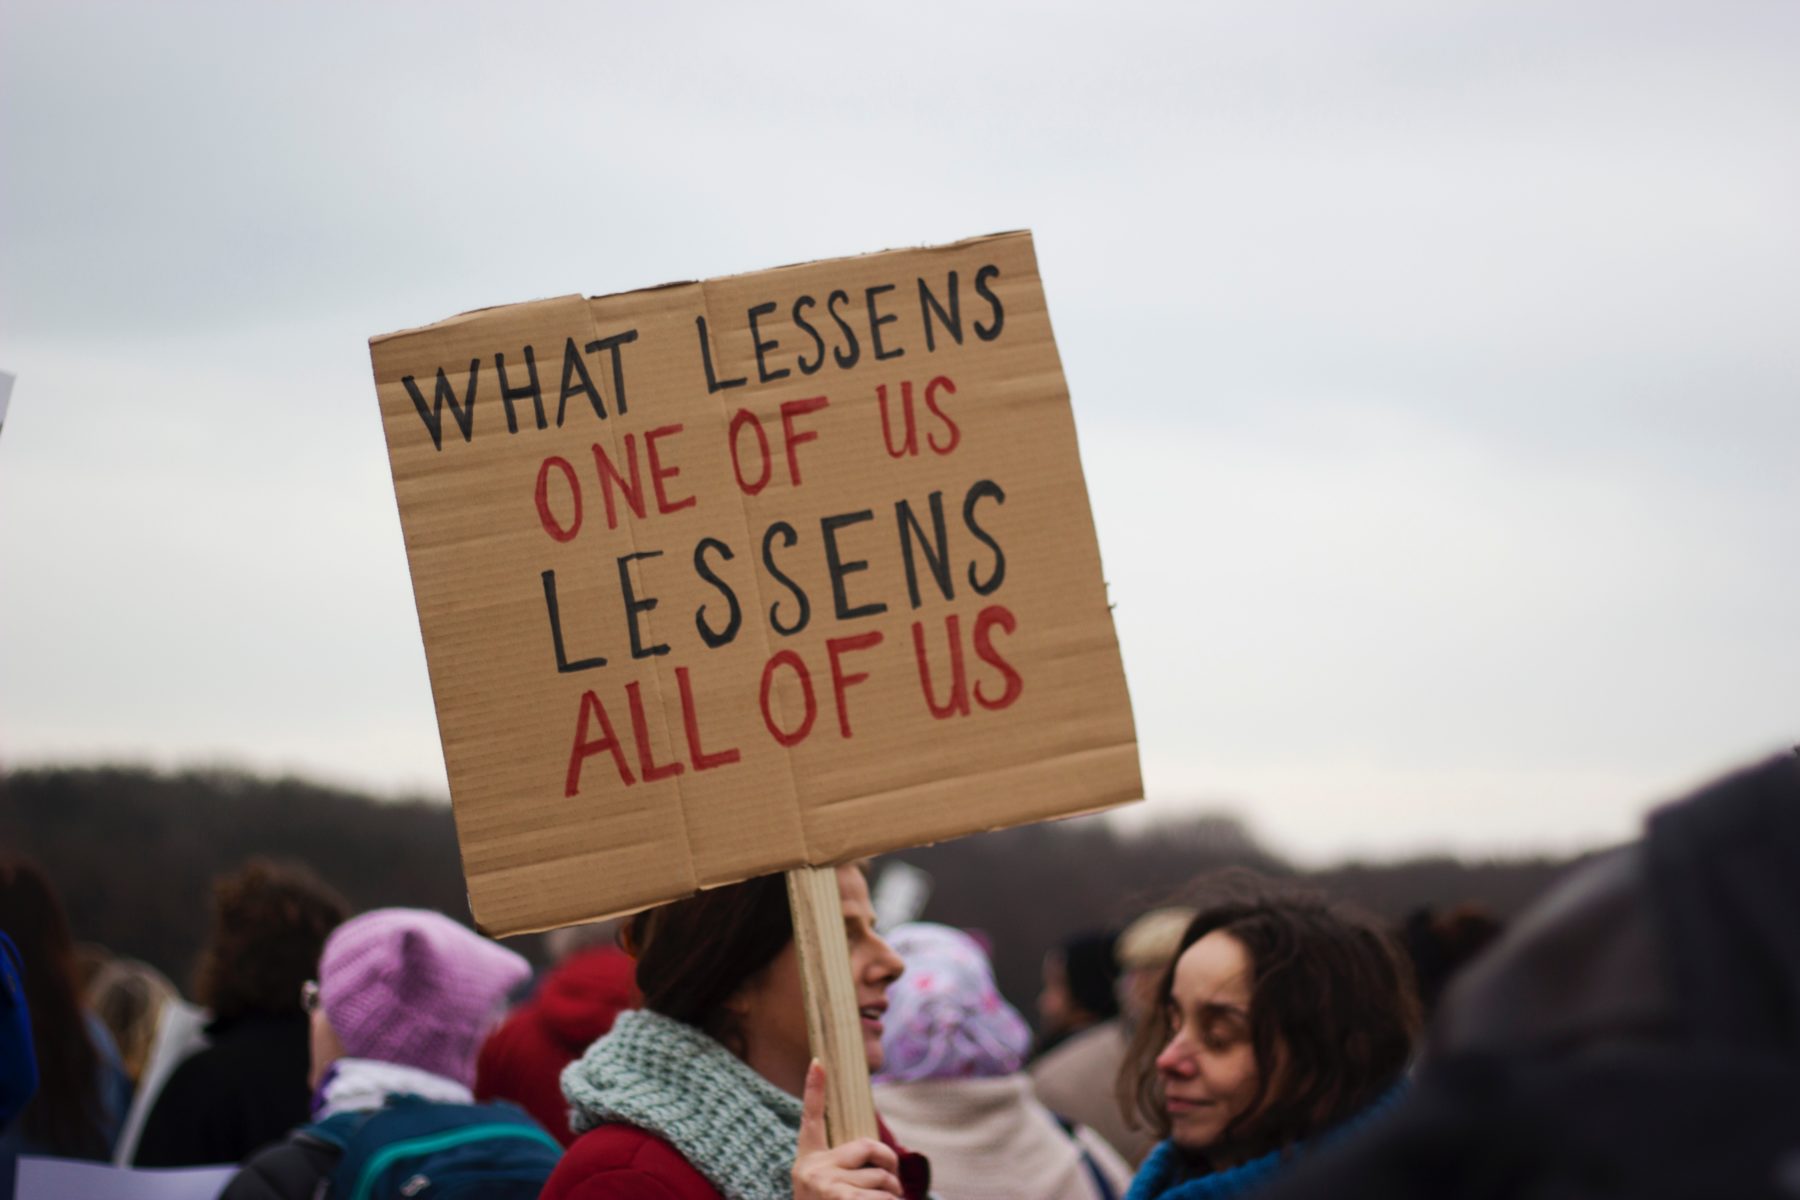 A young woman holding up a placard which says "what lessens one of us lessens all of us."